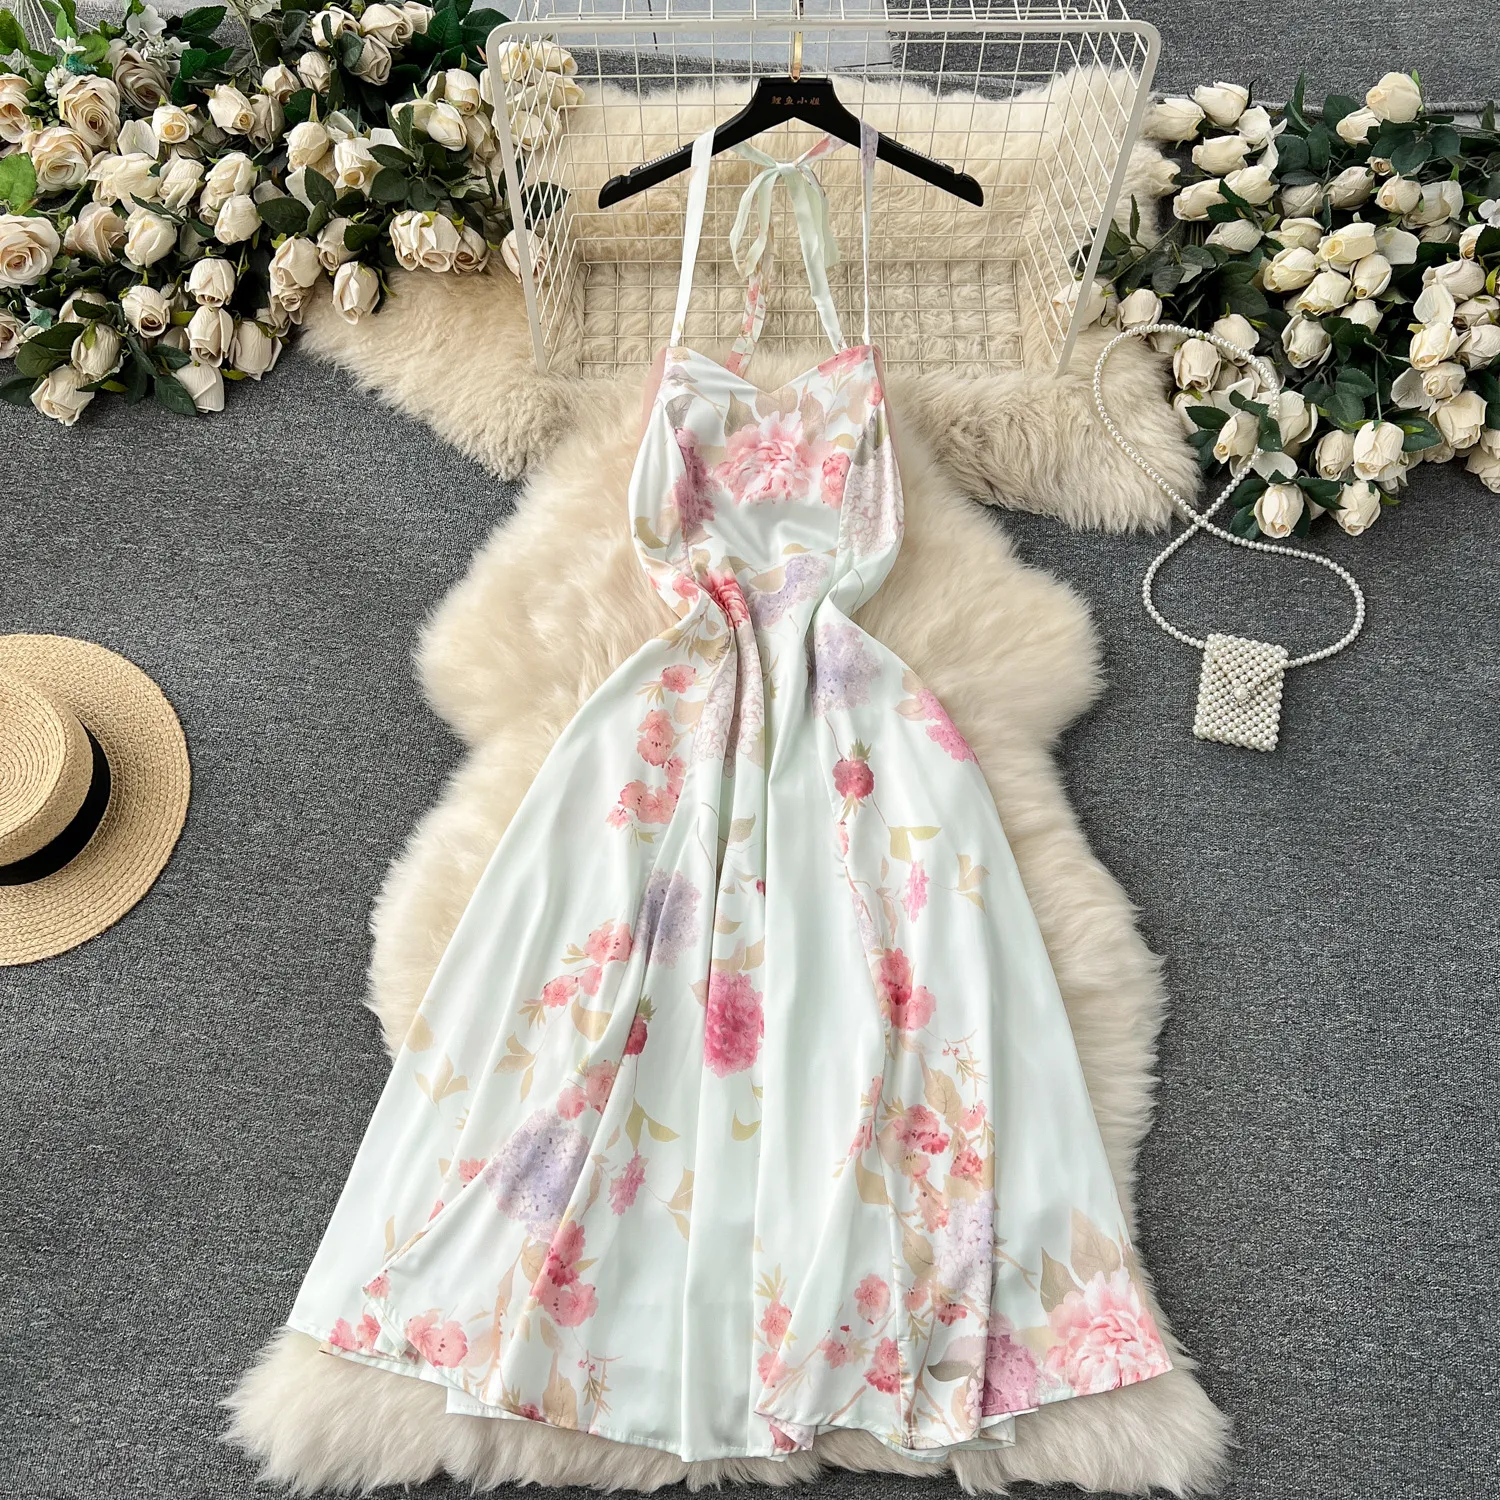 French Sweet Printed High end Exquisite Dress with Luxury Sensation, Celebrity Vacation Style, Sexy Backless Hanging Neck Dress